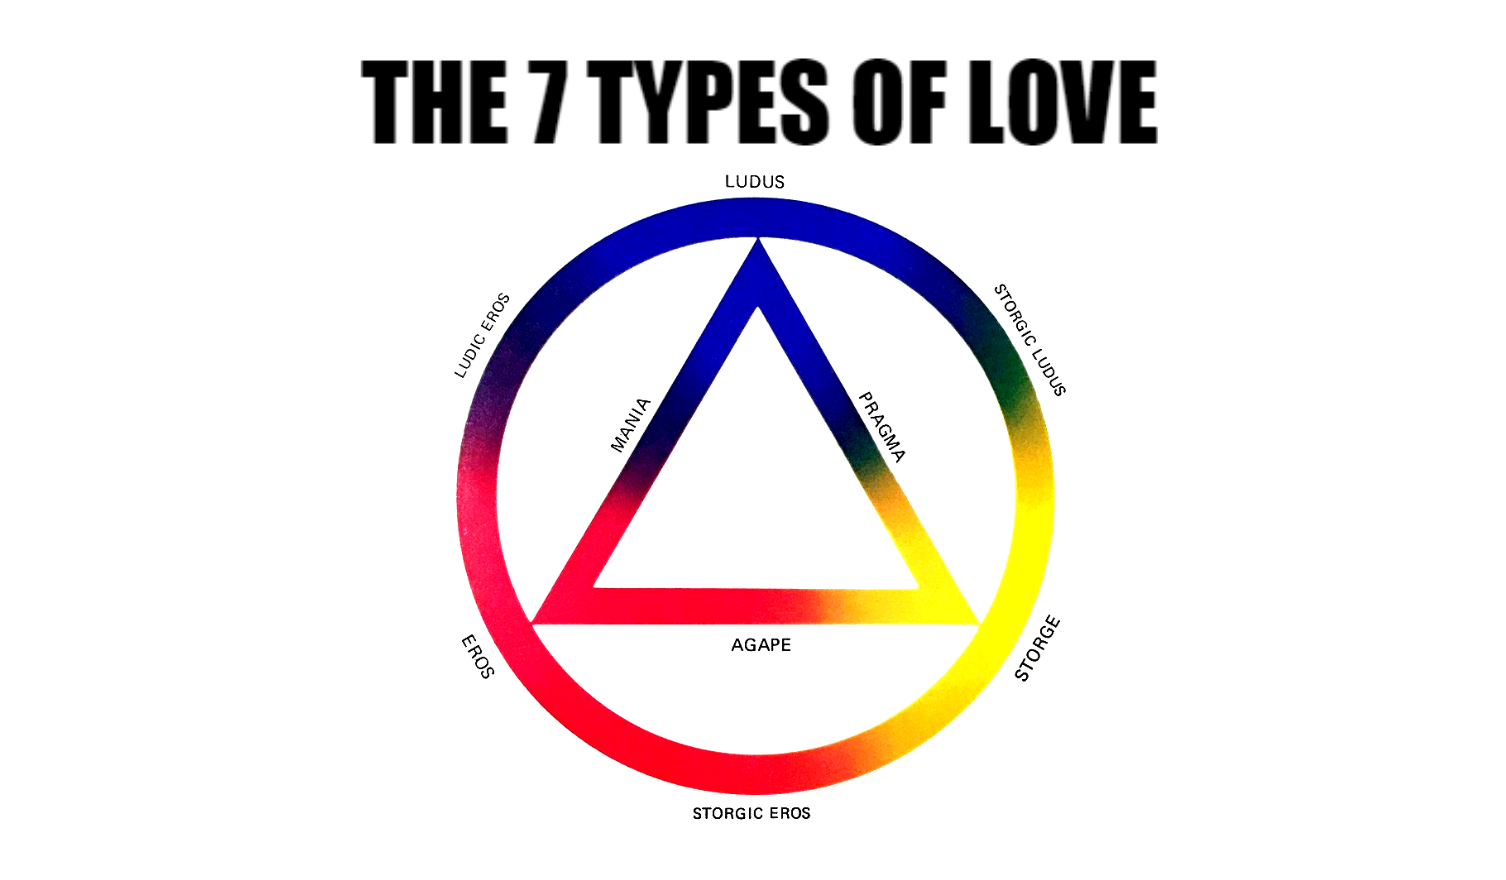 The 7 Types Of Love According To The Ancient Greeks We All Experience.